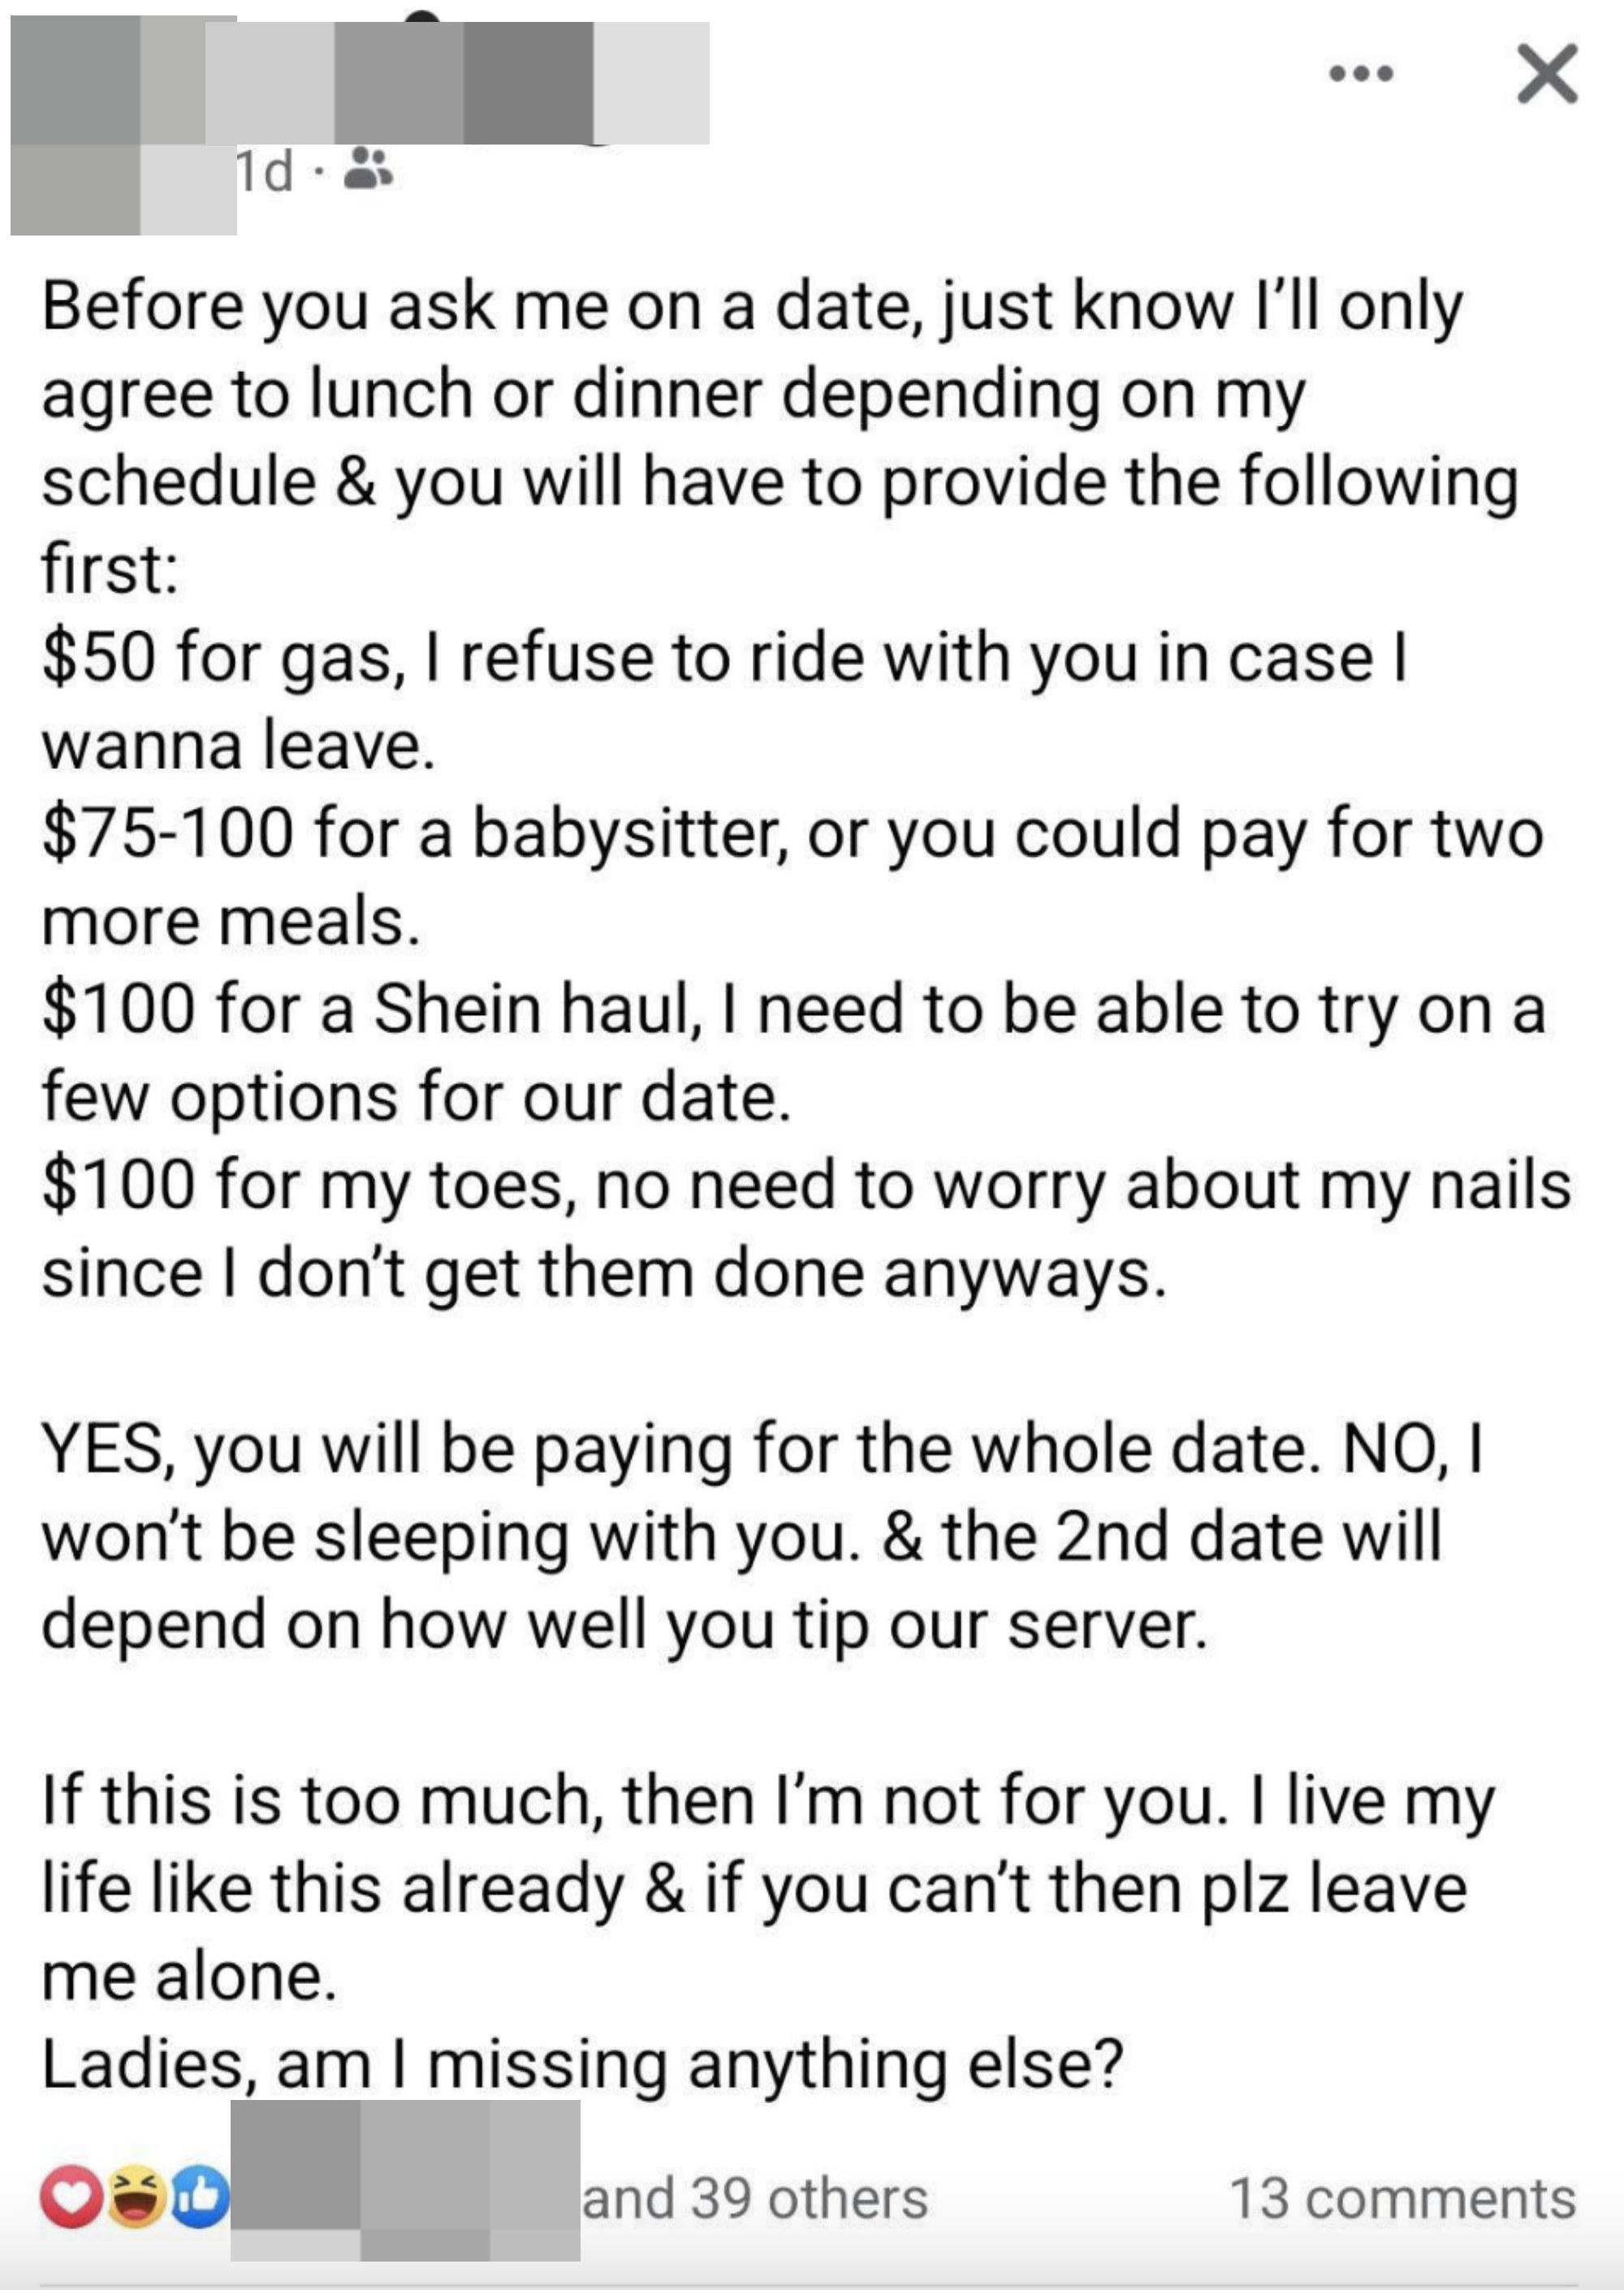 Her date will have to provide over $300 for her date prep, including babysitter and toenails, and pay for the date, and no, she&#x27;s not sleeping with them, and second date will depend on how well the date tips the server